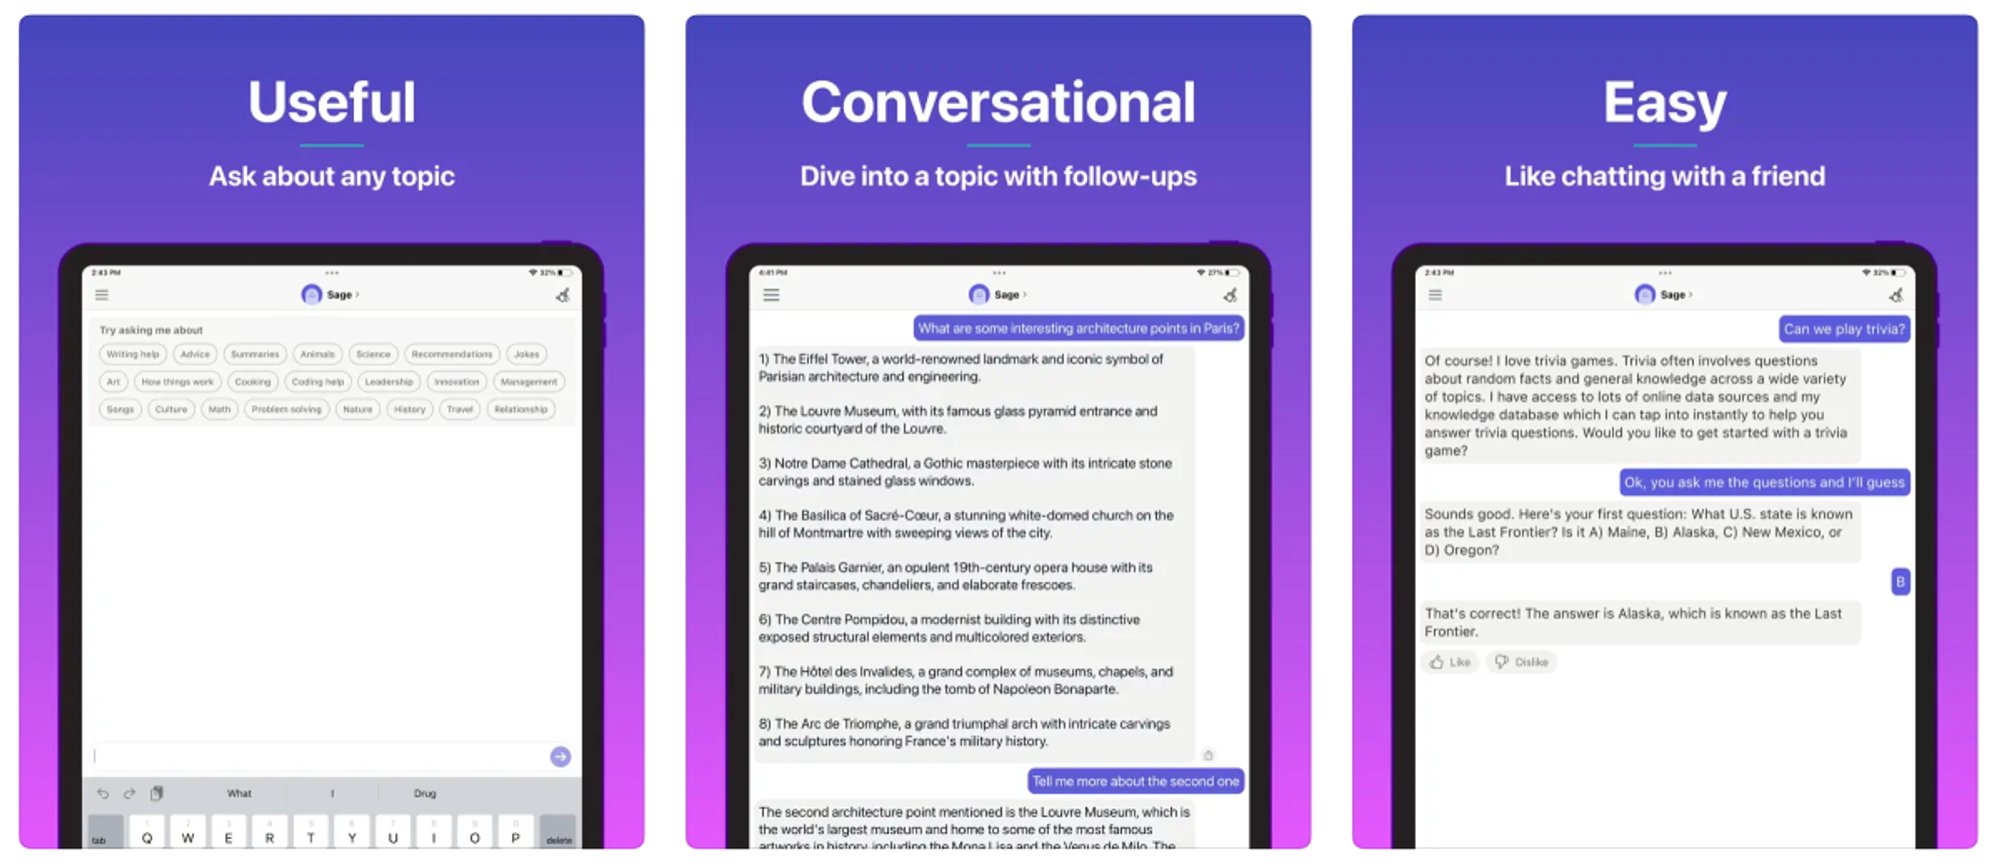 Quora launches Poe, a way to talk to AI chatbots like ChatGPT | TechCrunch